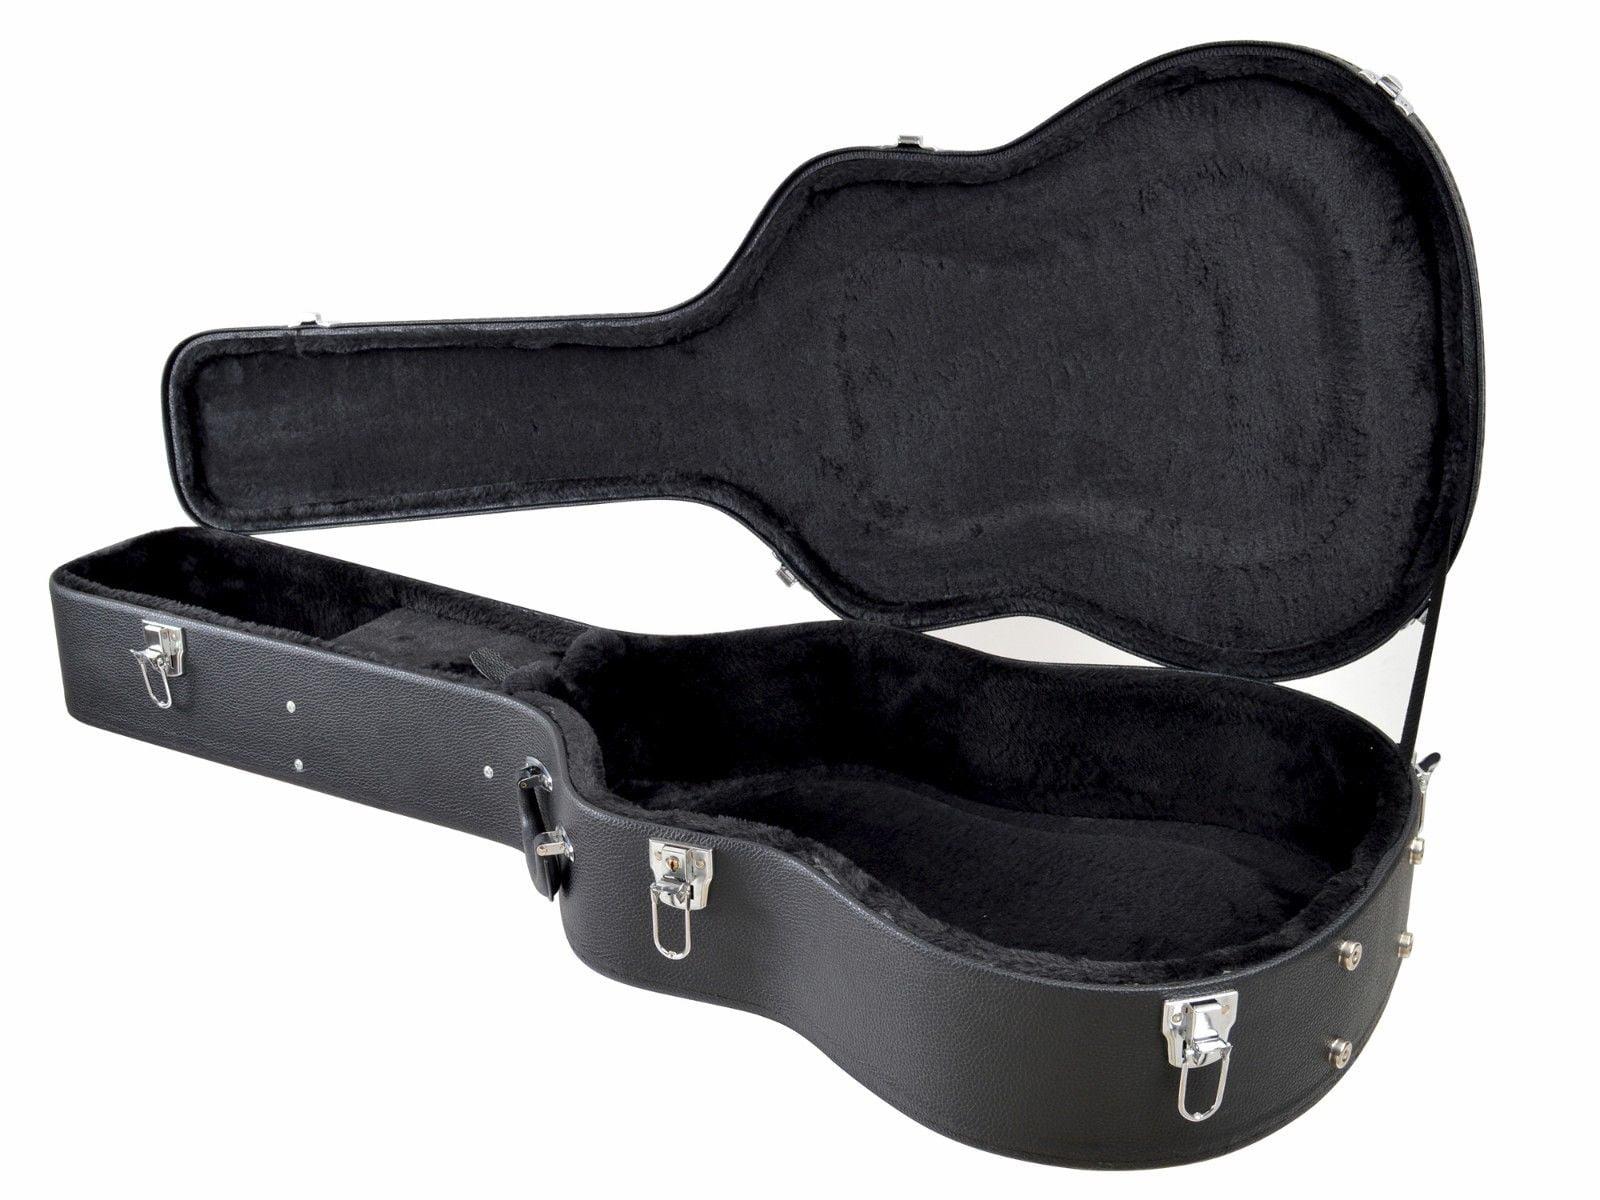 AW 41 Acoustic Dreadnought Guitar Hard Case Wooden Hard Shell Carrying Case with Lock Latch Key Black